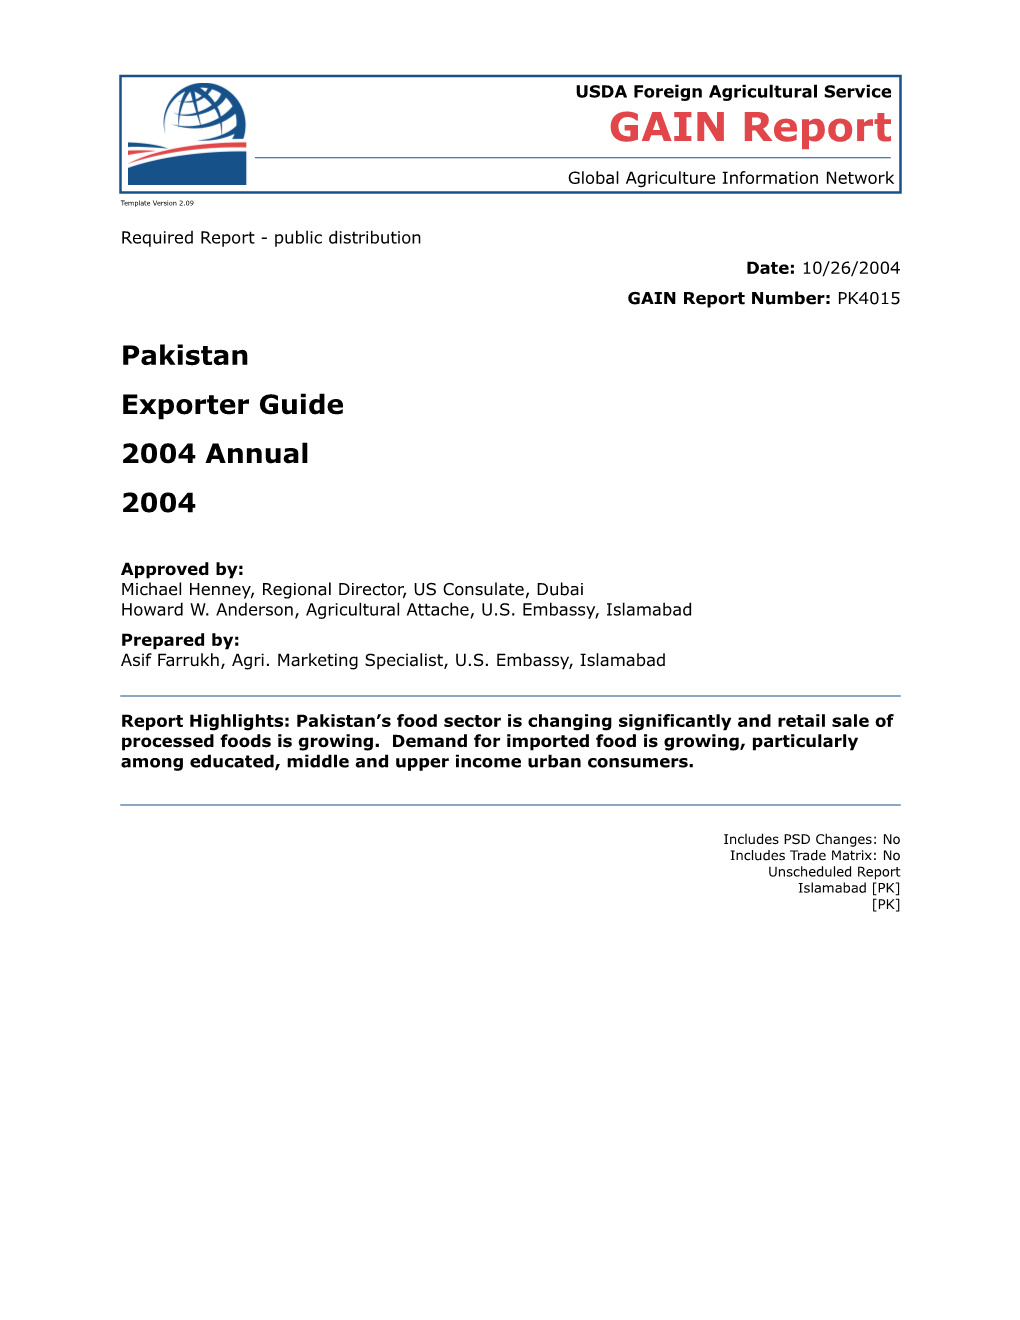 Required Report - Public Distribution s24